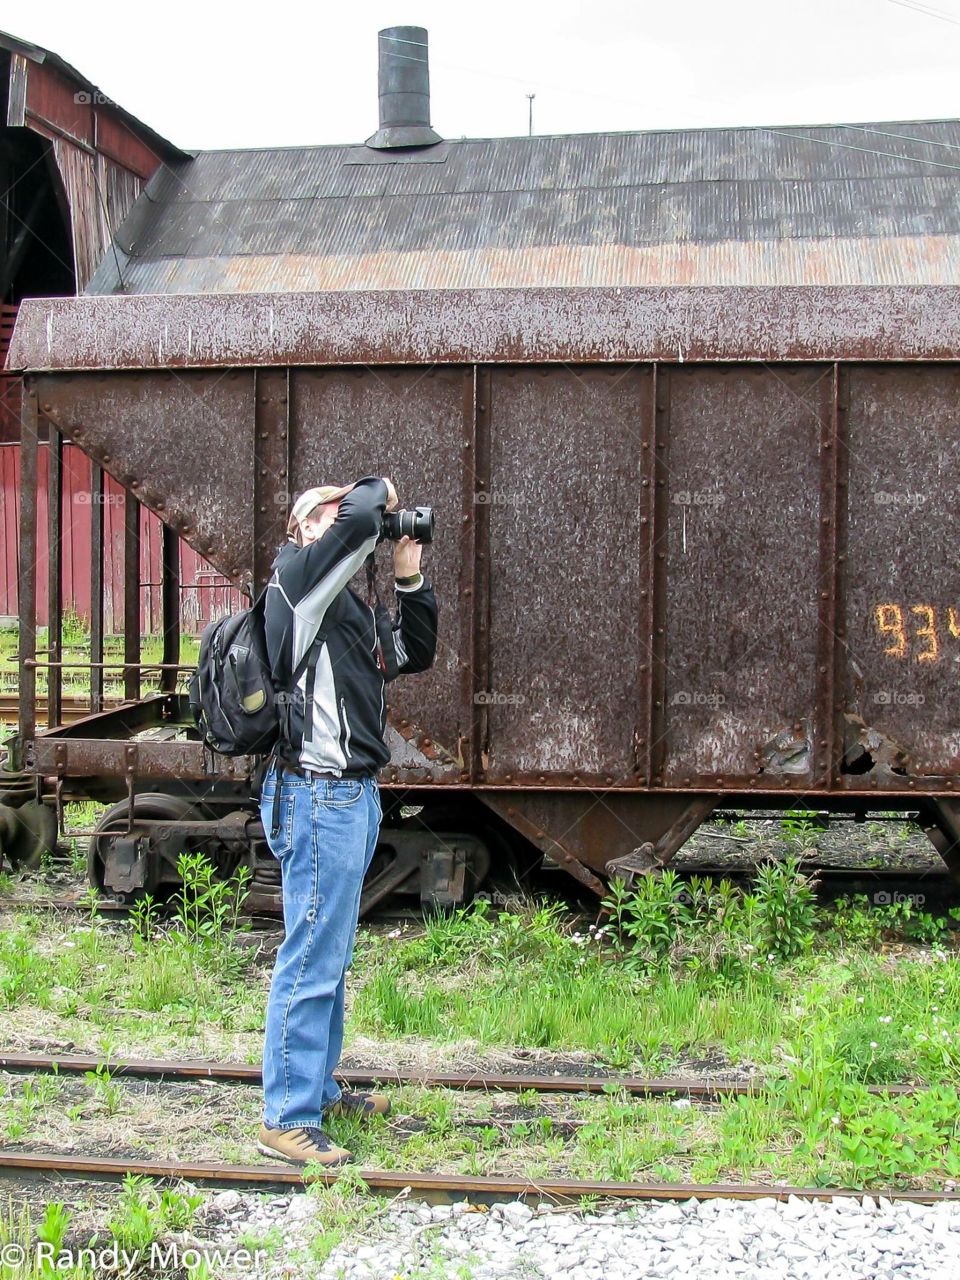 My son taking photos for a HDR project at East Broad top Railroad